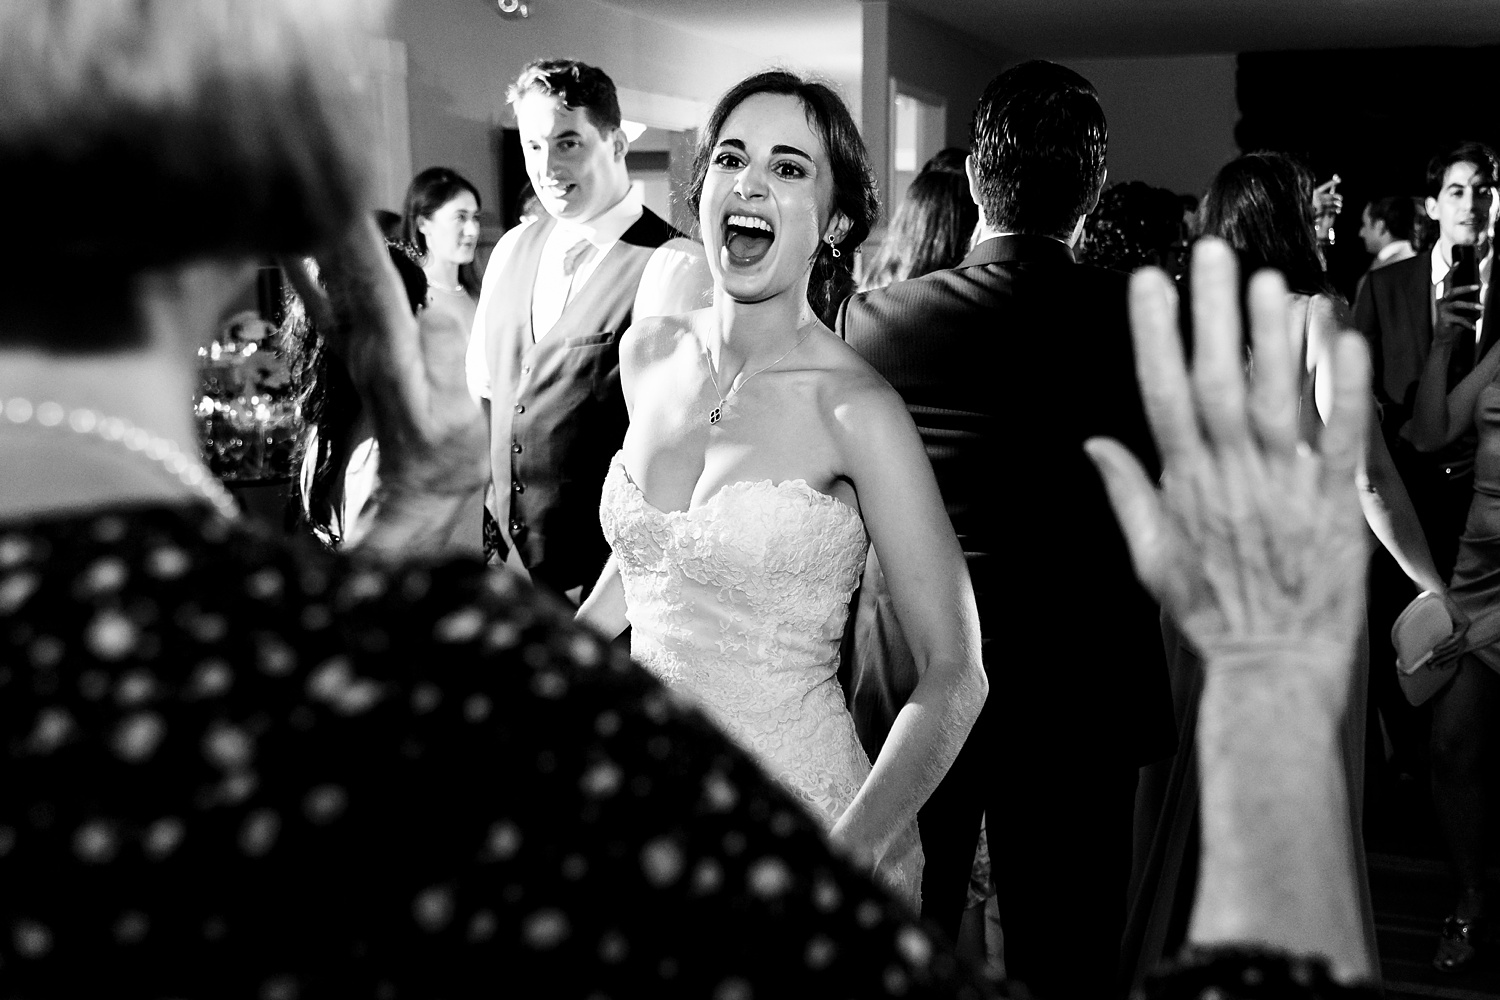 The bride exudes happiness on the wedding day